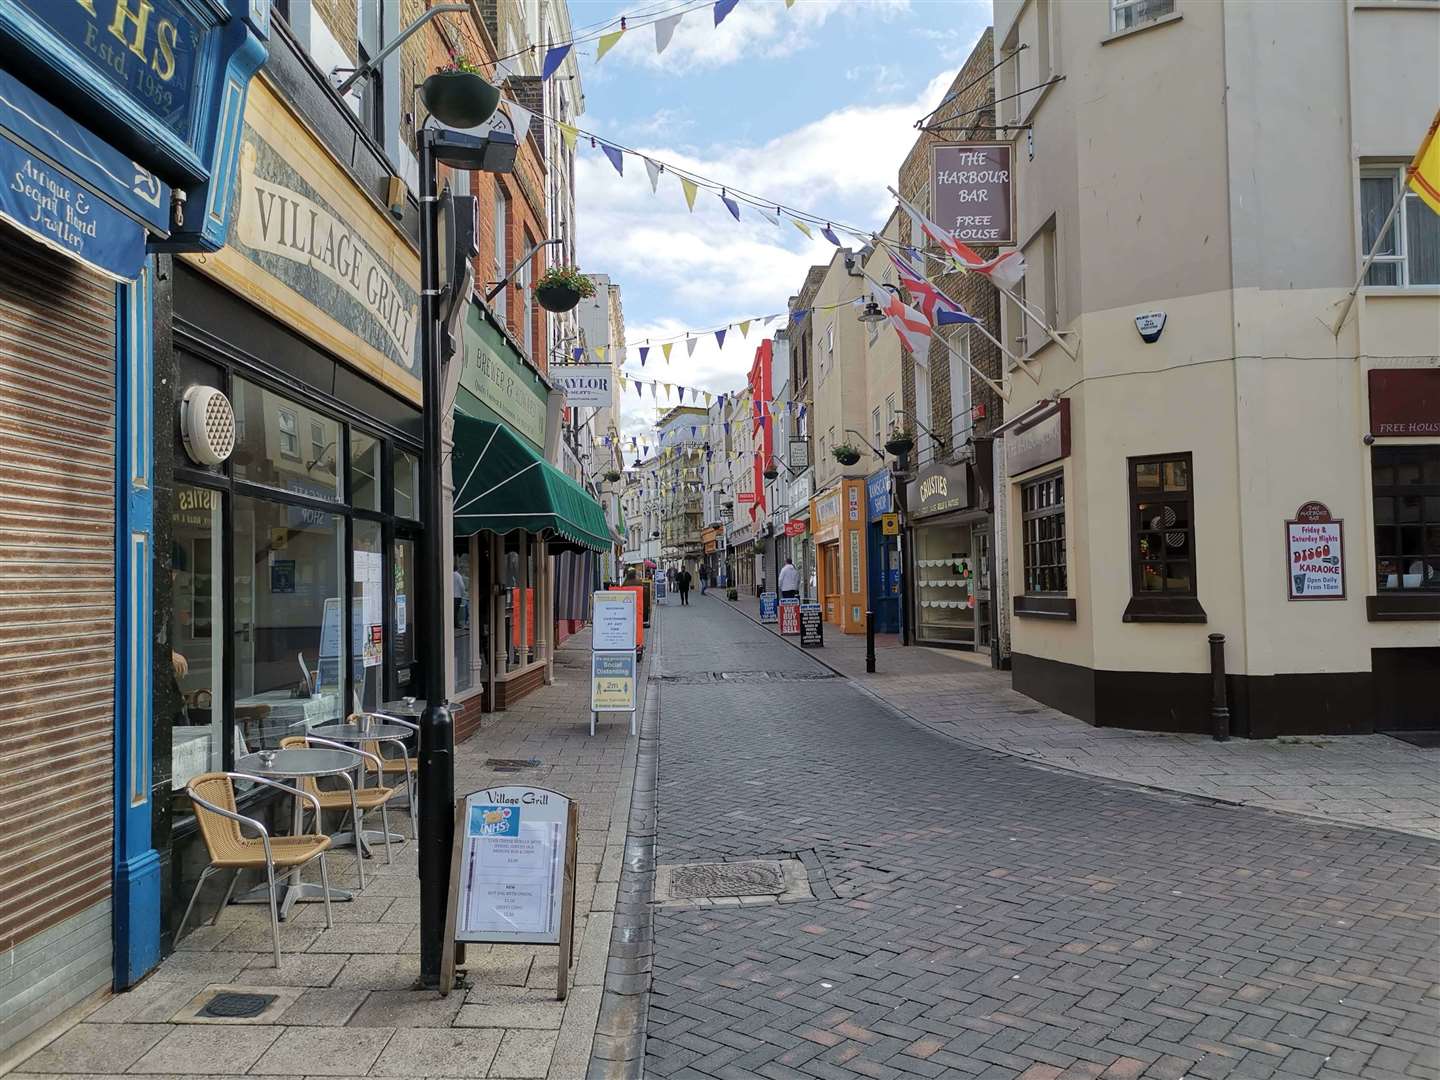 The attacks took place in Ramsgate town centre